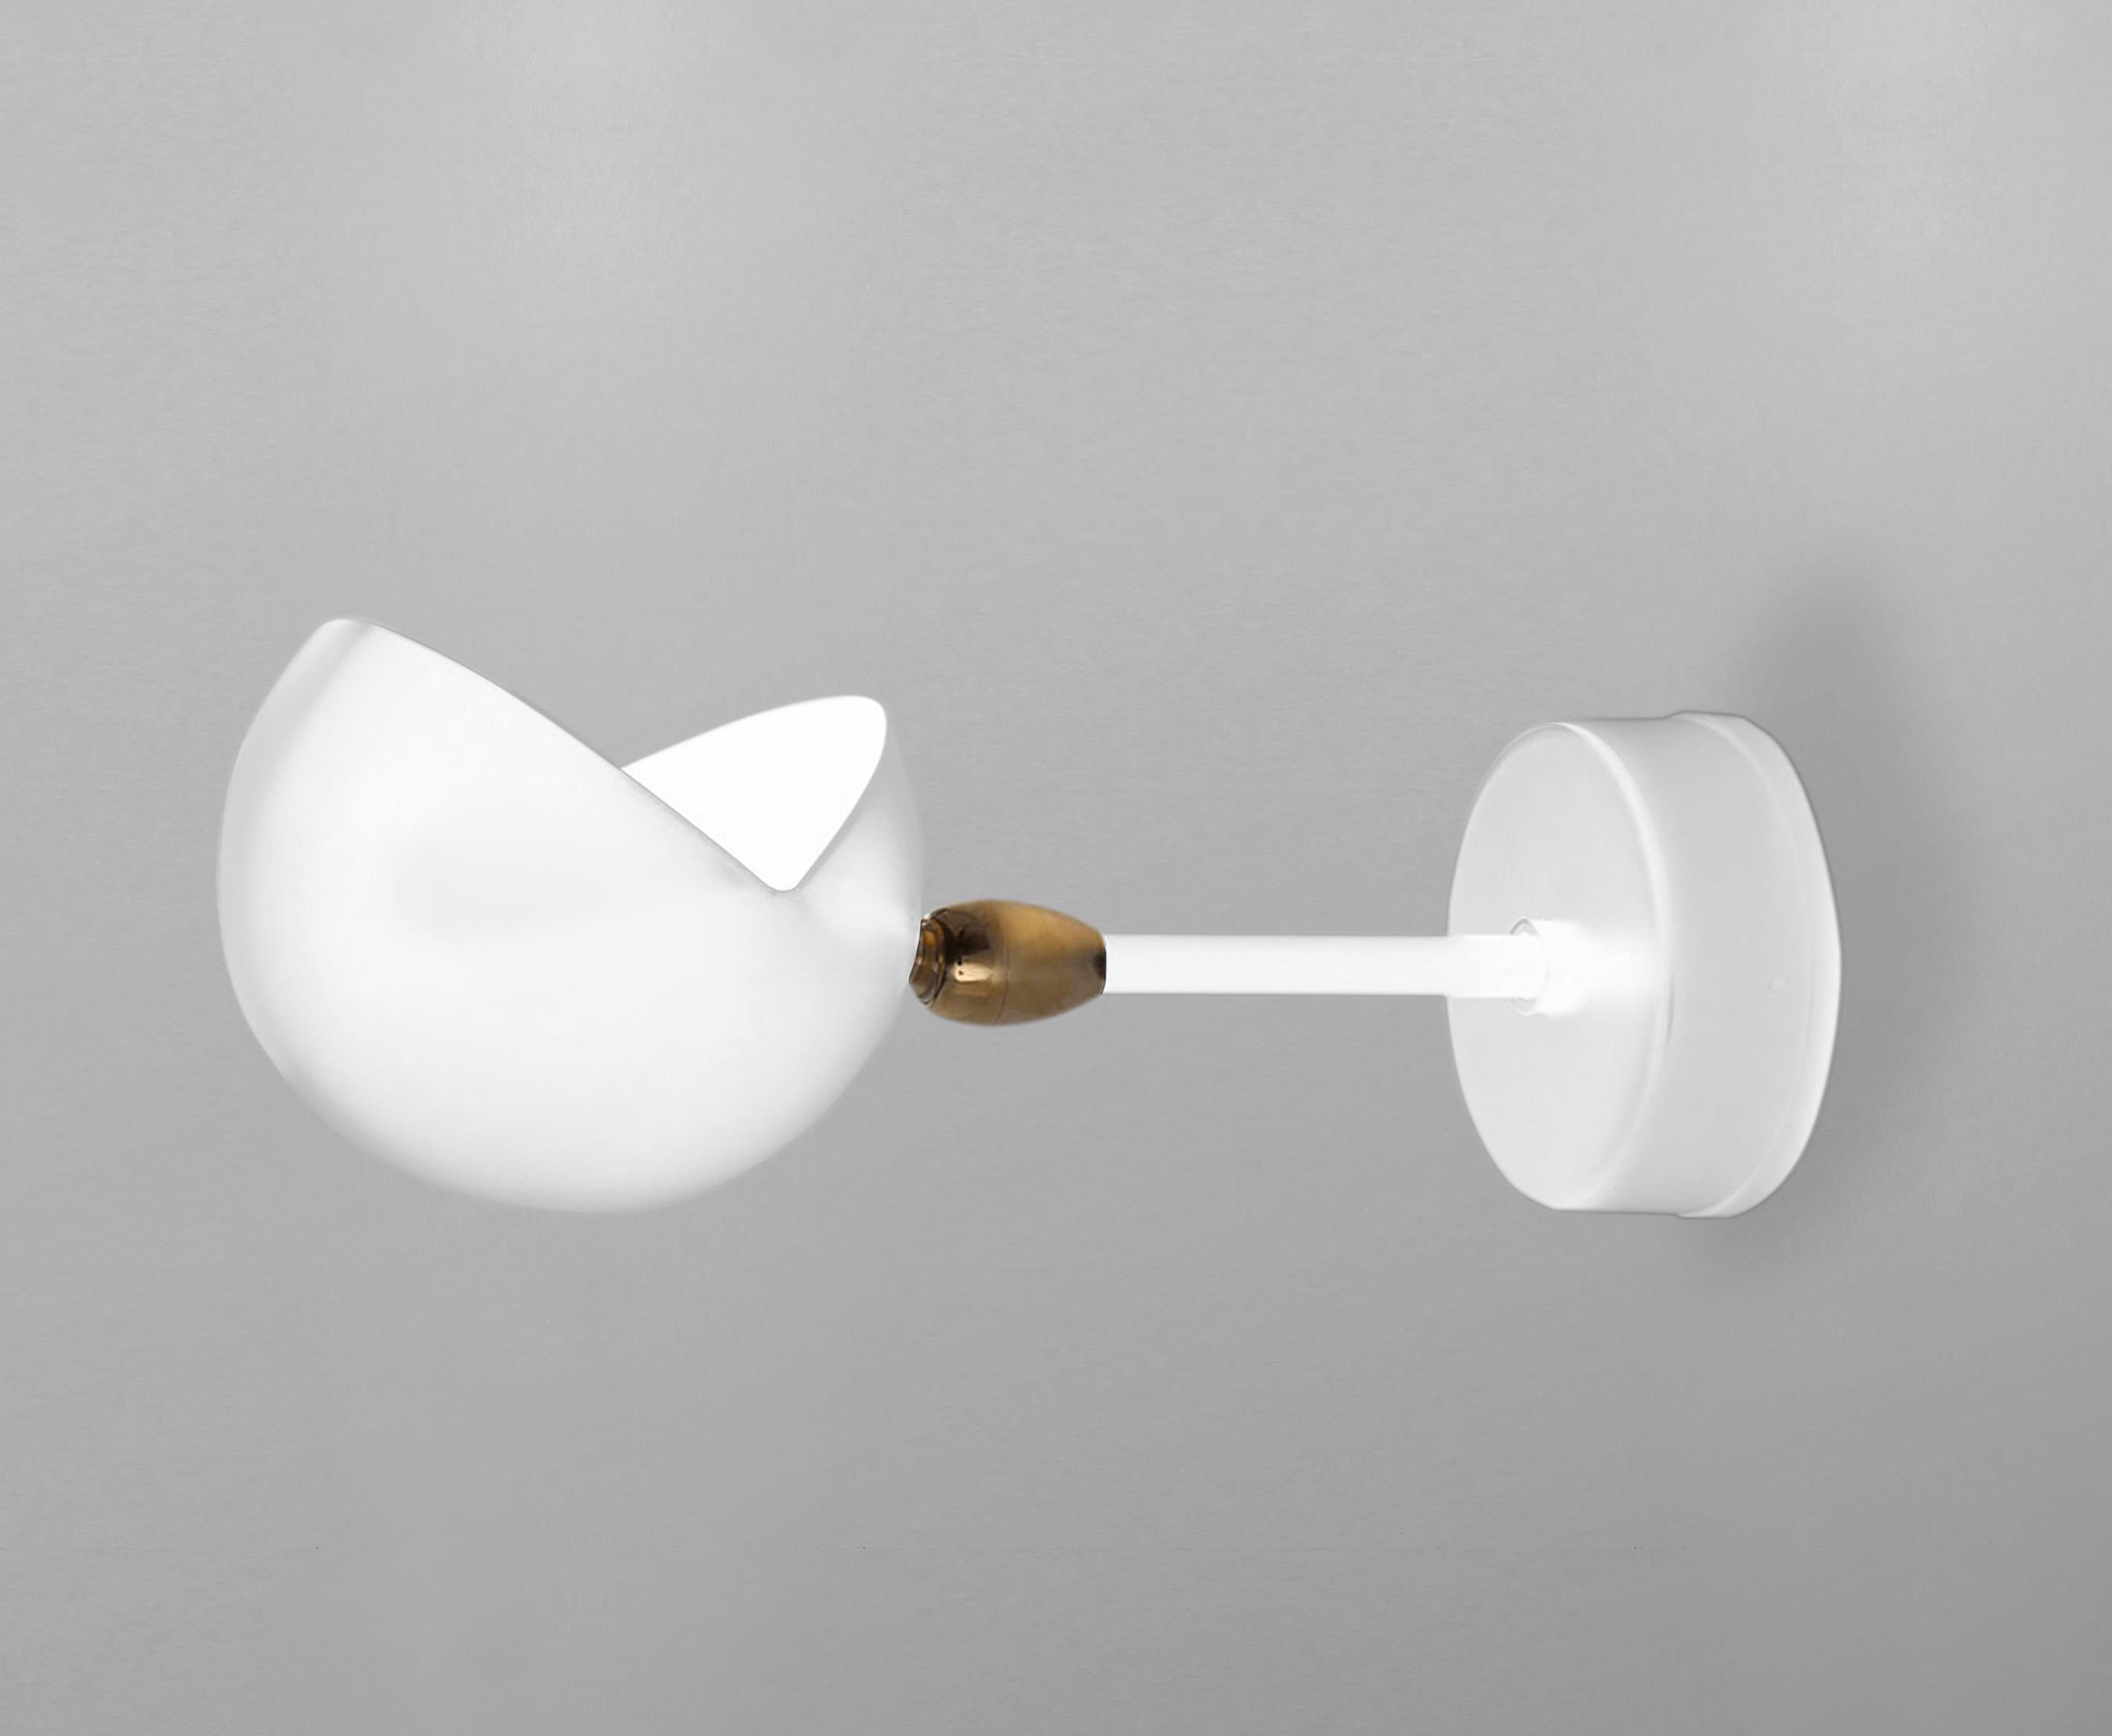 French Serge Mouille Mid-Century Modern White Eye Sconce Wall Lamp